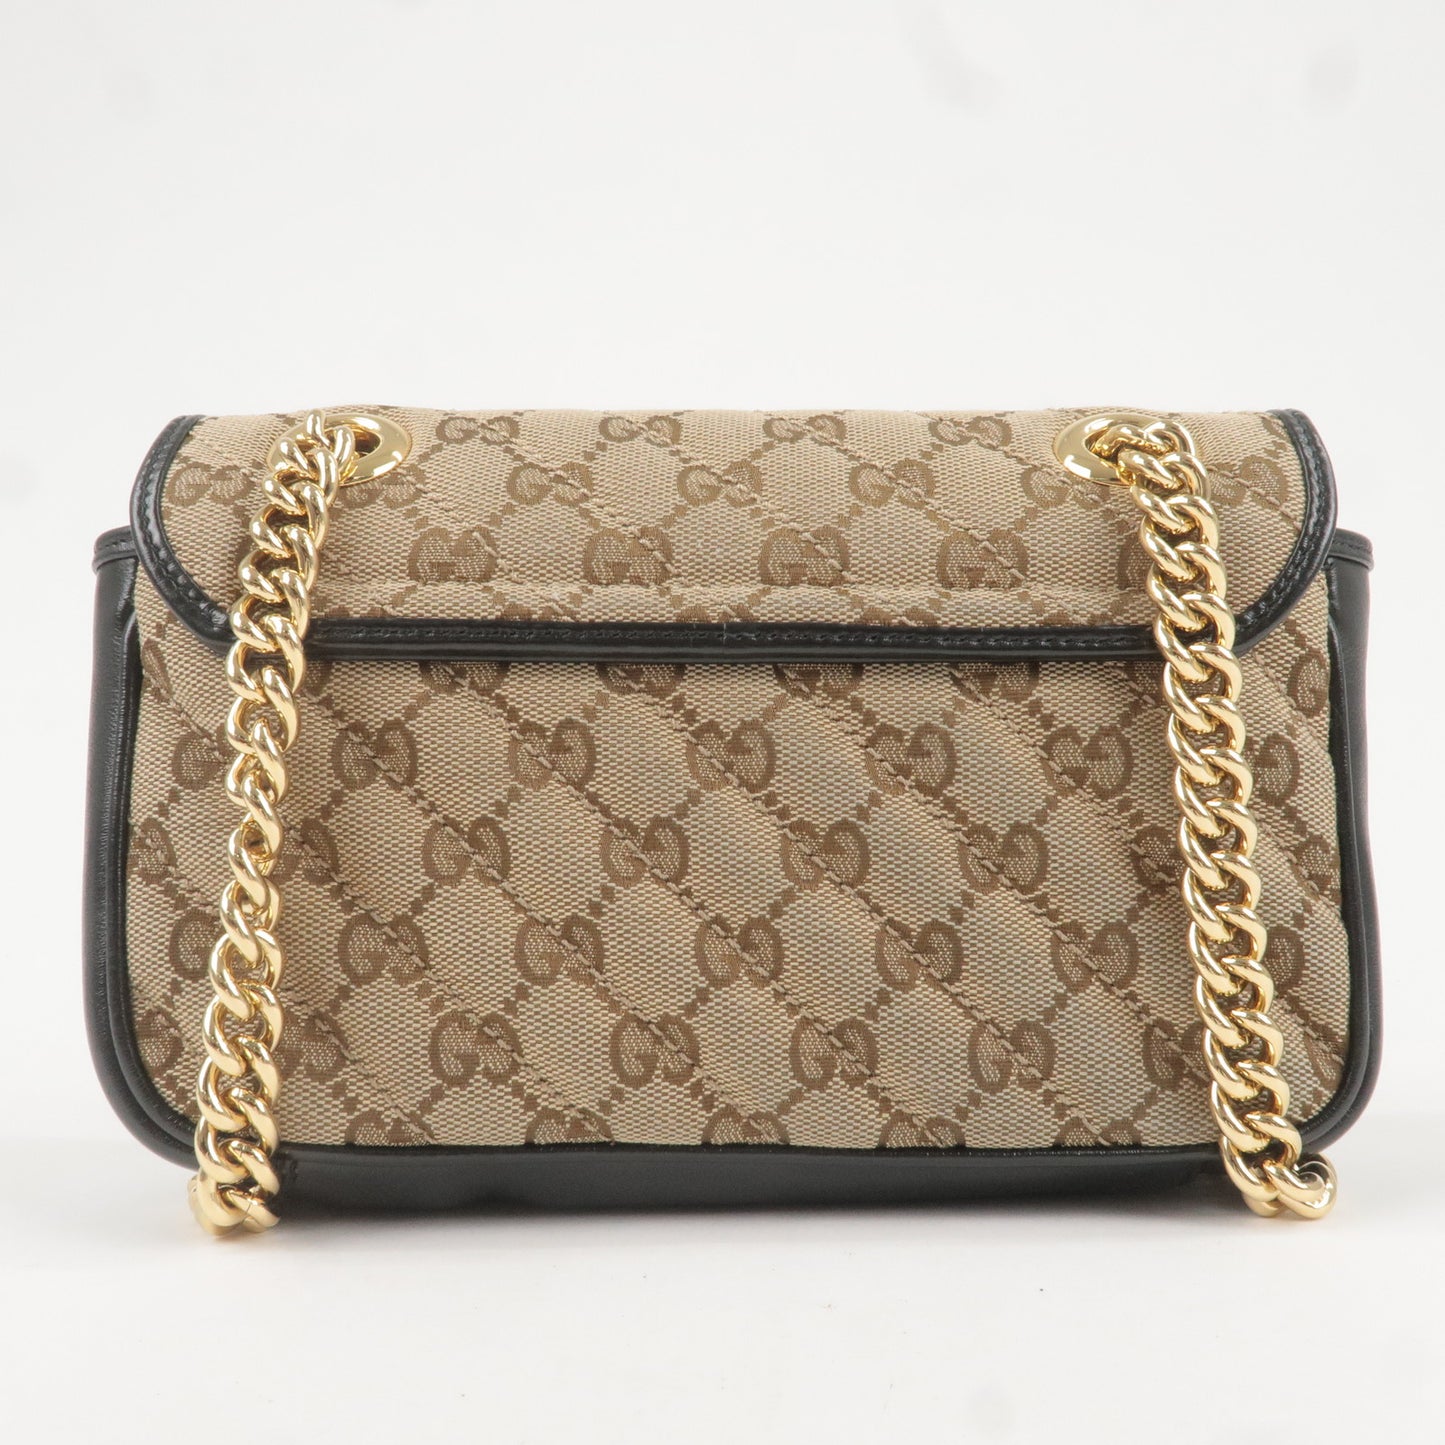 GUCCI GG Marmont GG Canvas Leather Chain Shoulder Bag 446744